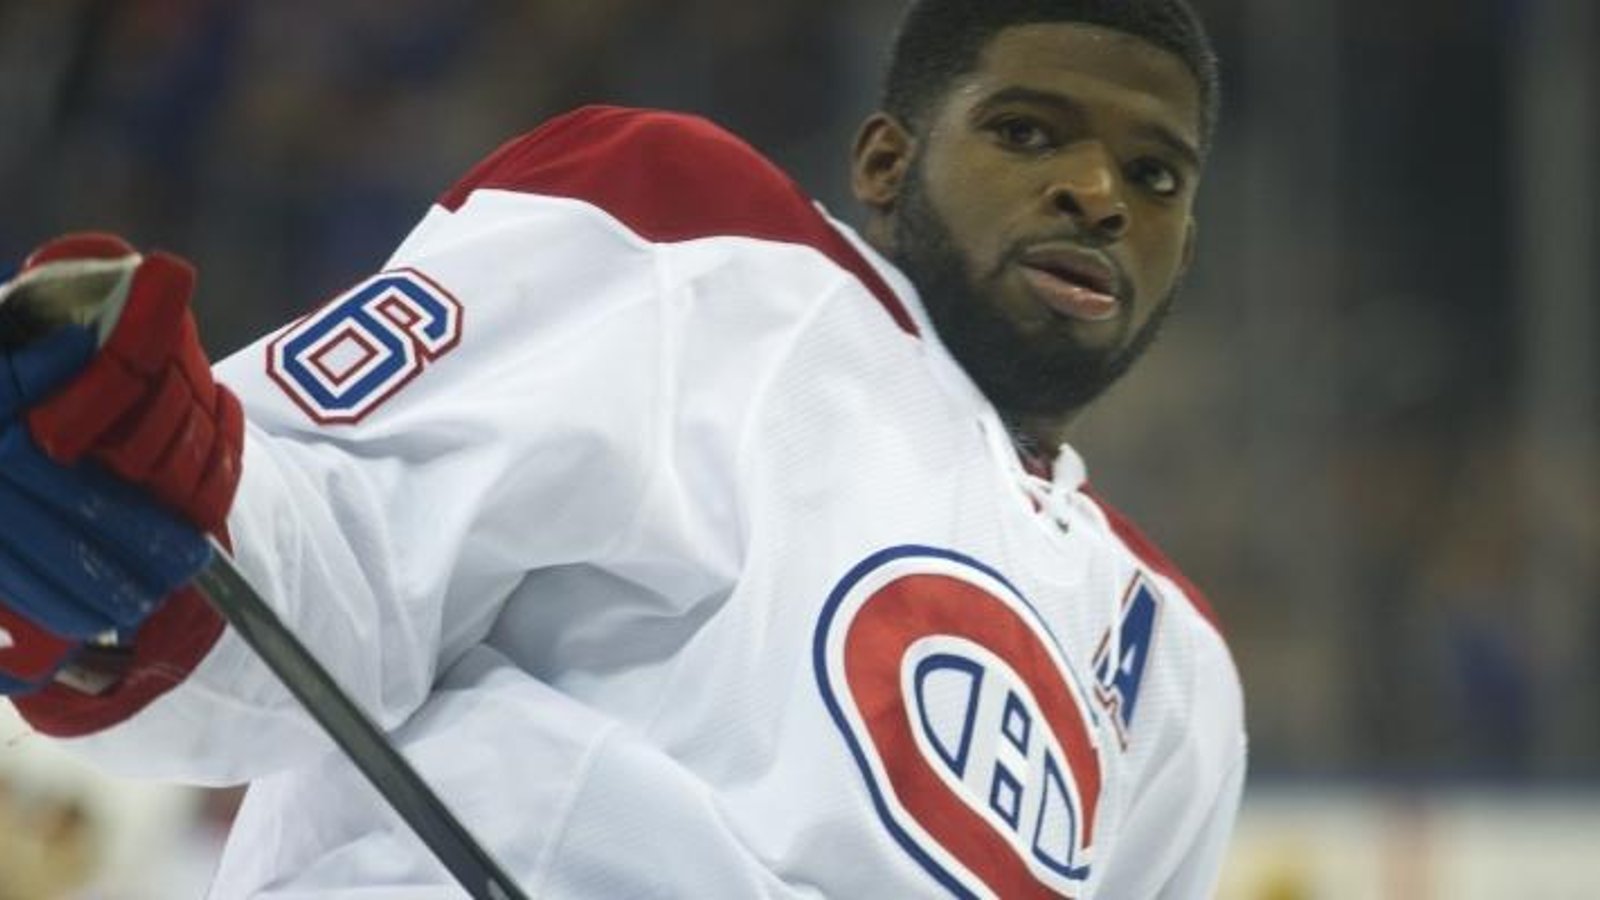 Former player implies racism in the Habs organization was the motivator for Subban trade.